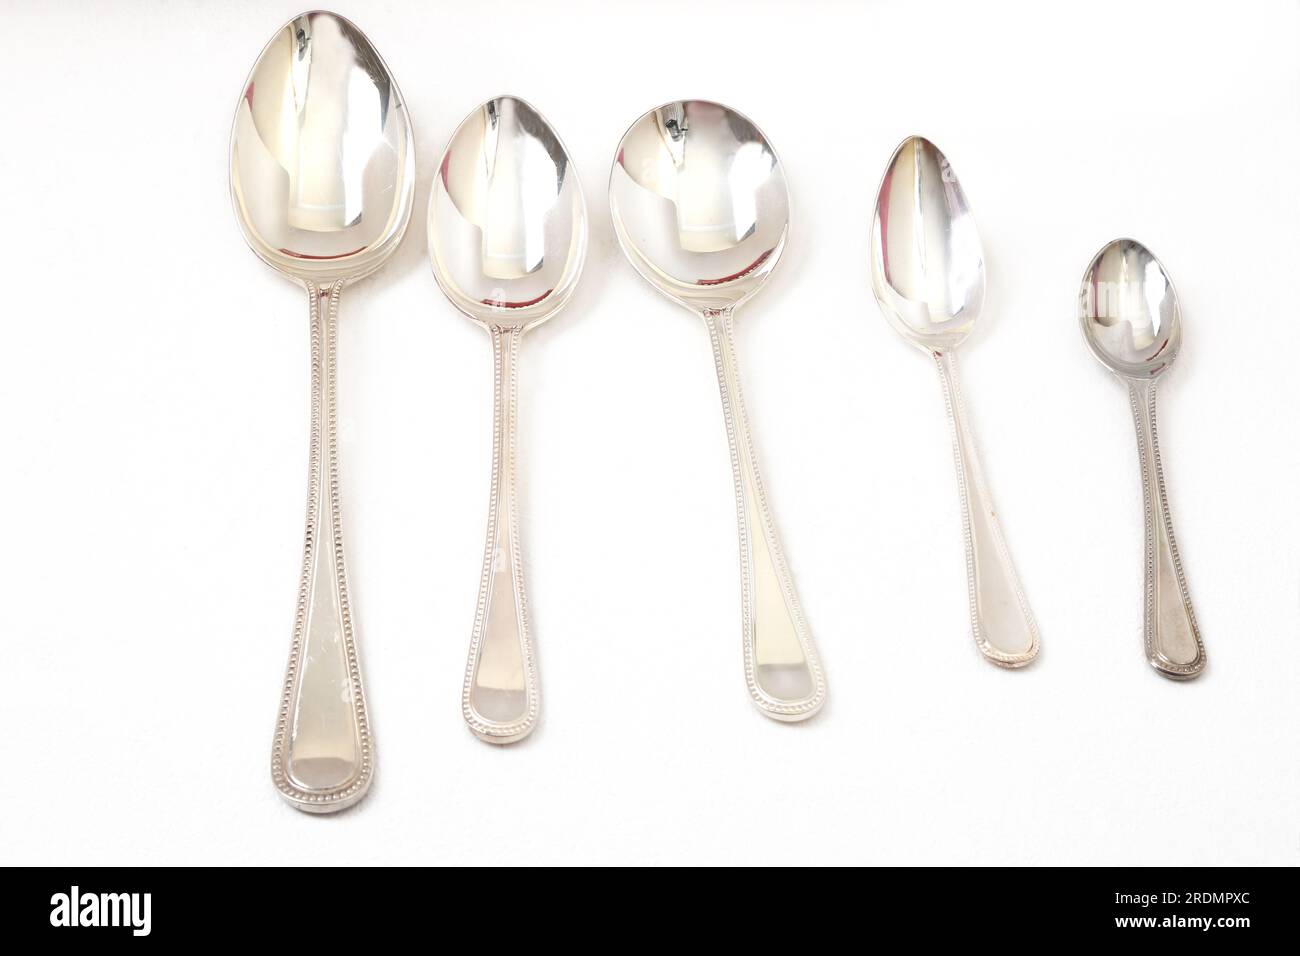 https://c8.alamy.com/comp/2RDMPXC/regalia-set-of-different-size-spoons-from-canteen-service-silver-cutlery-set-traditional-bead-style-2RDMPXC.jpg